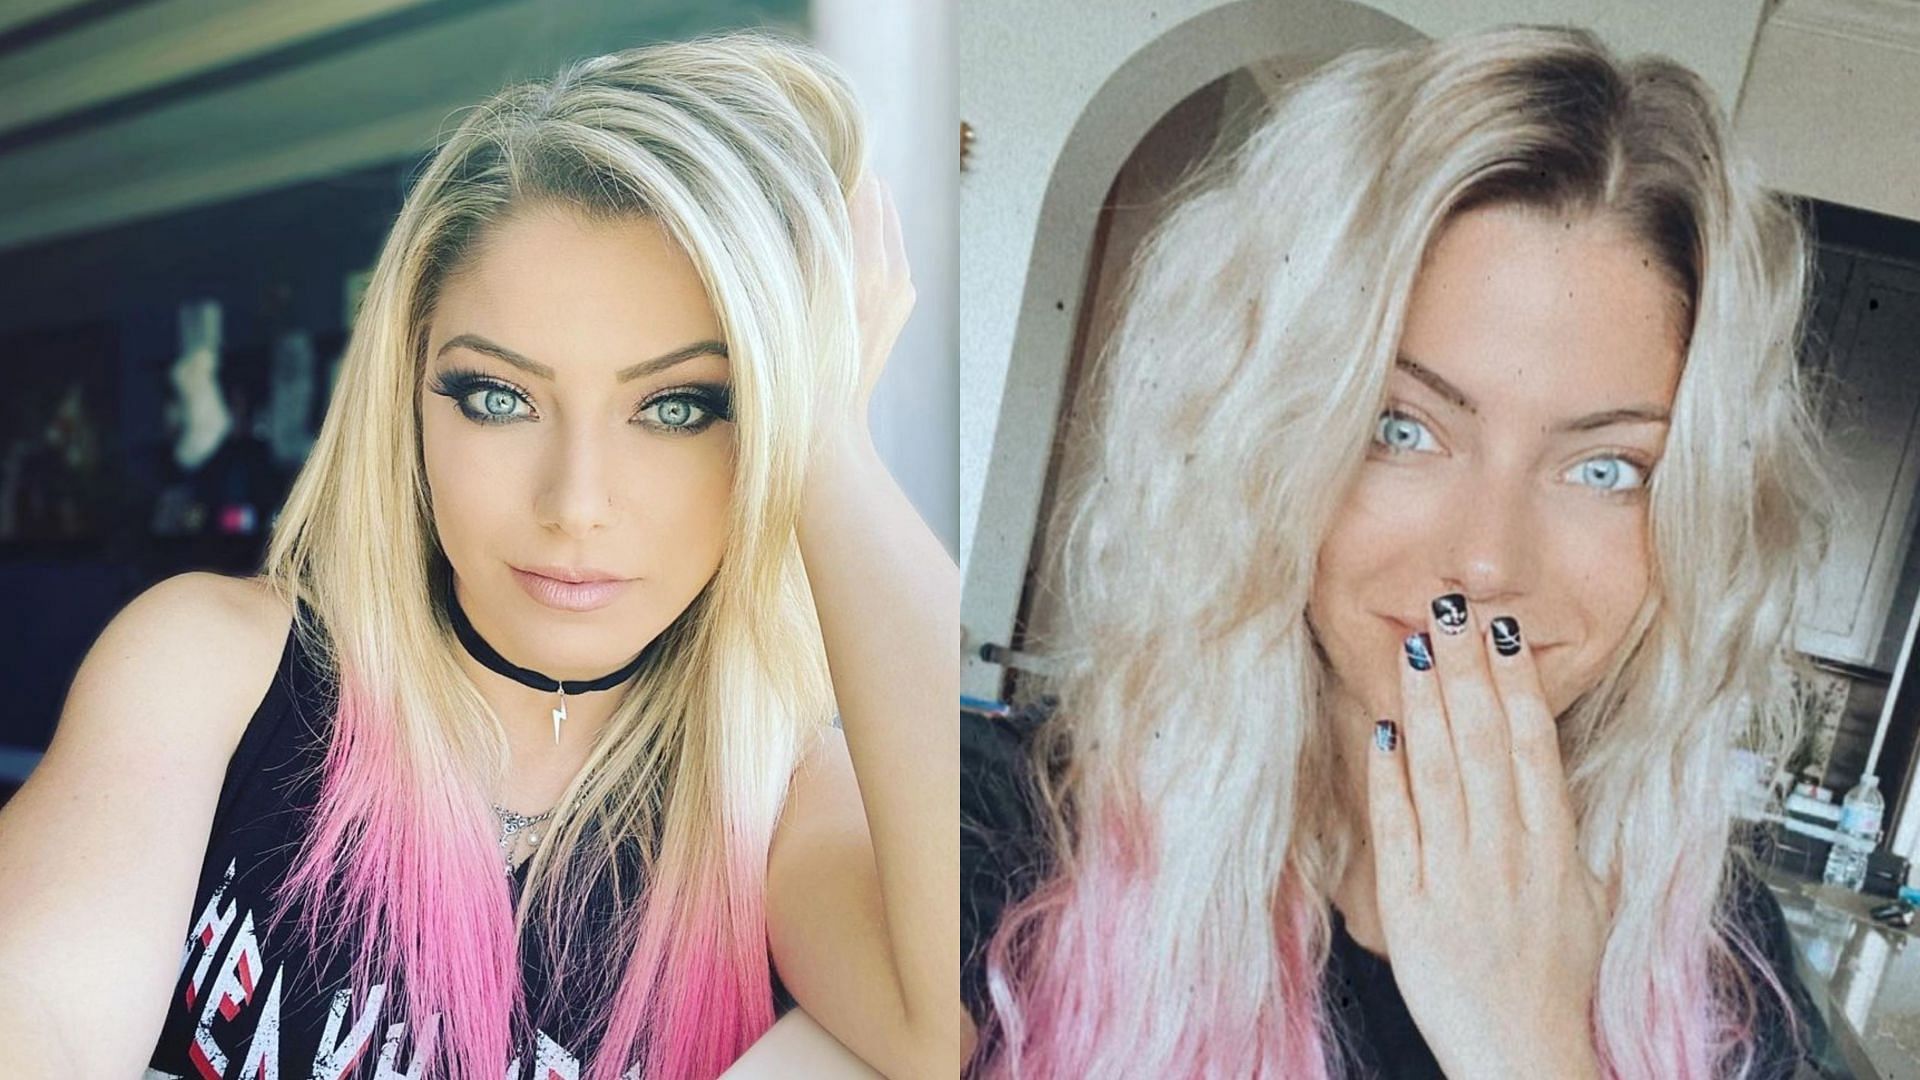 When Alexa Bliss invited 50-year-old ex-WWE star to her bedroom